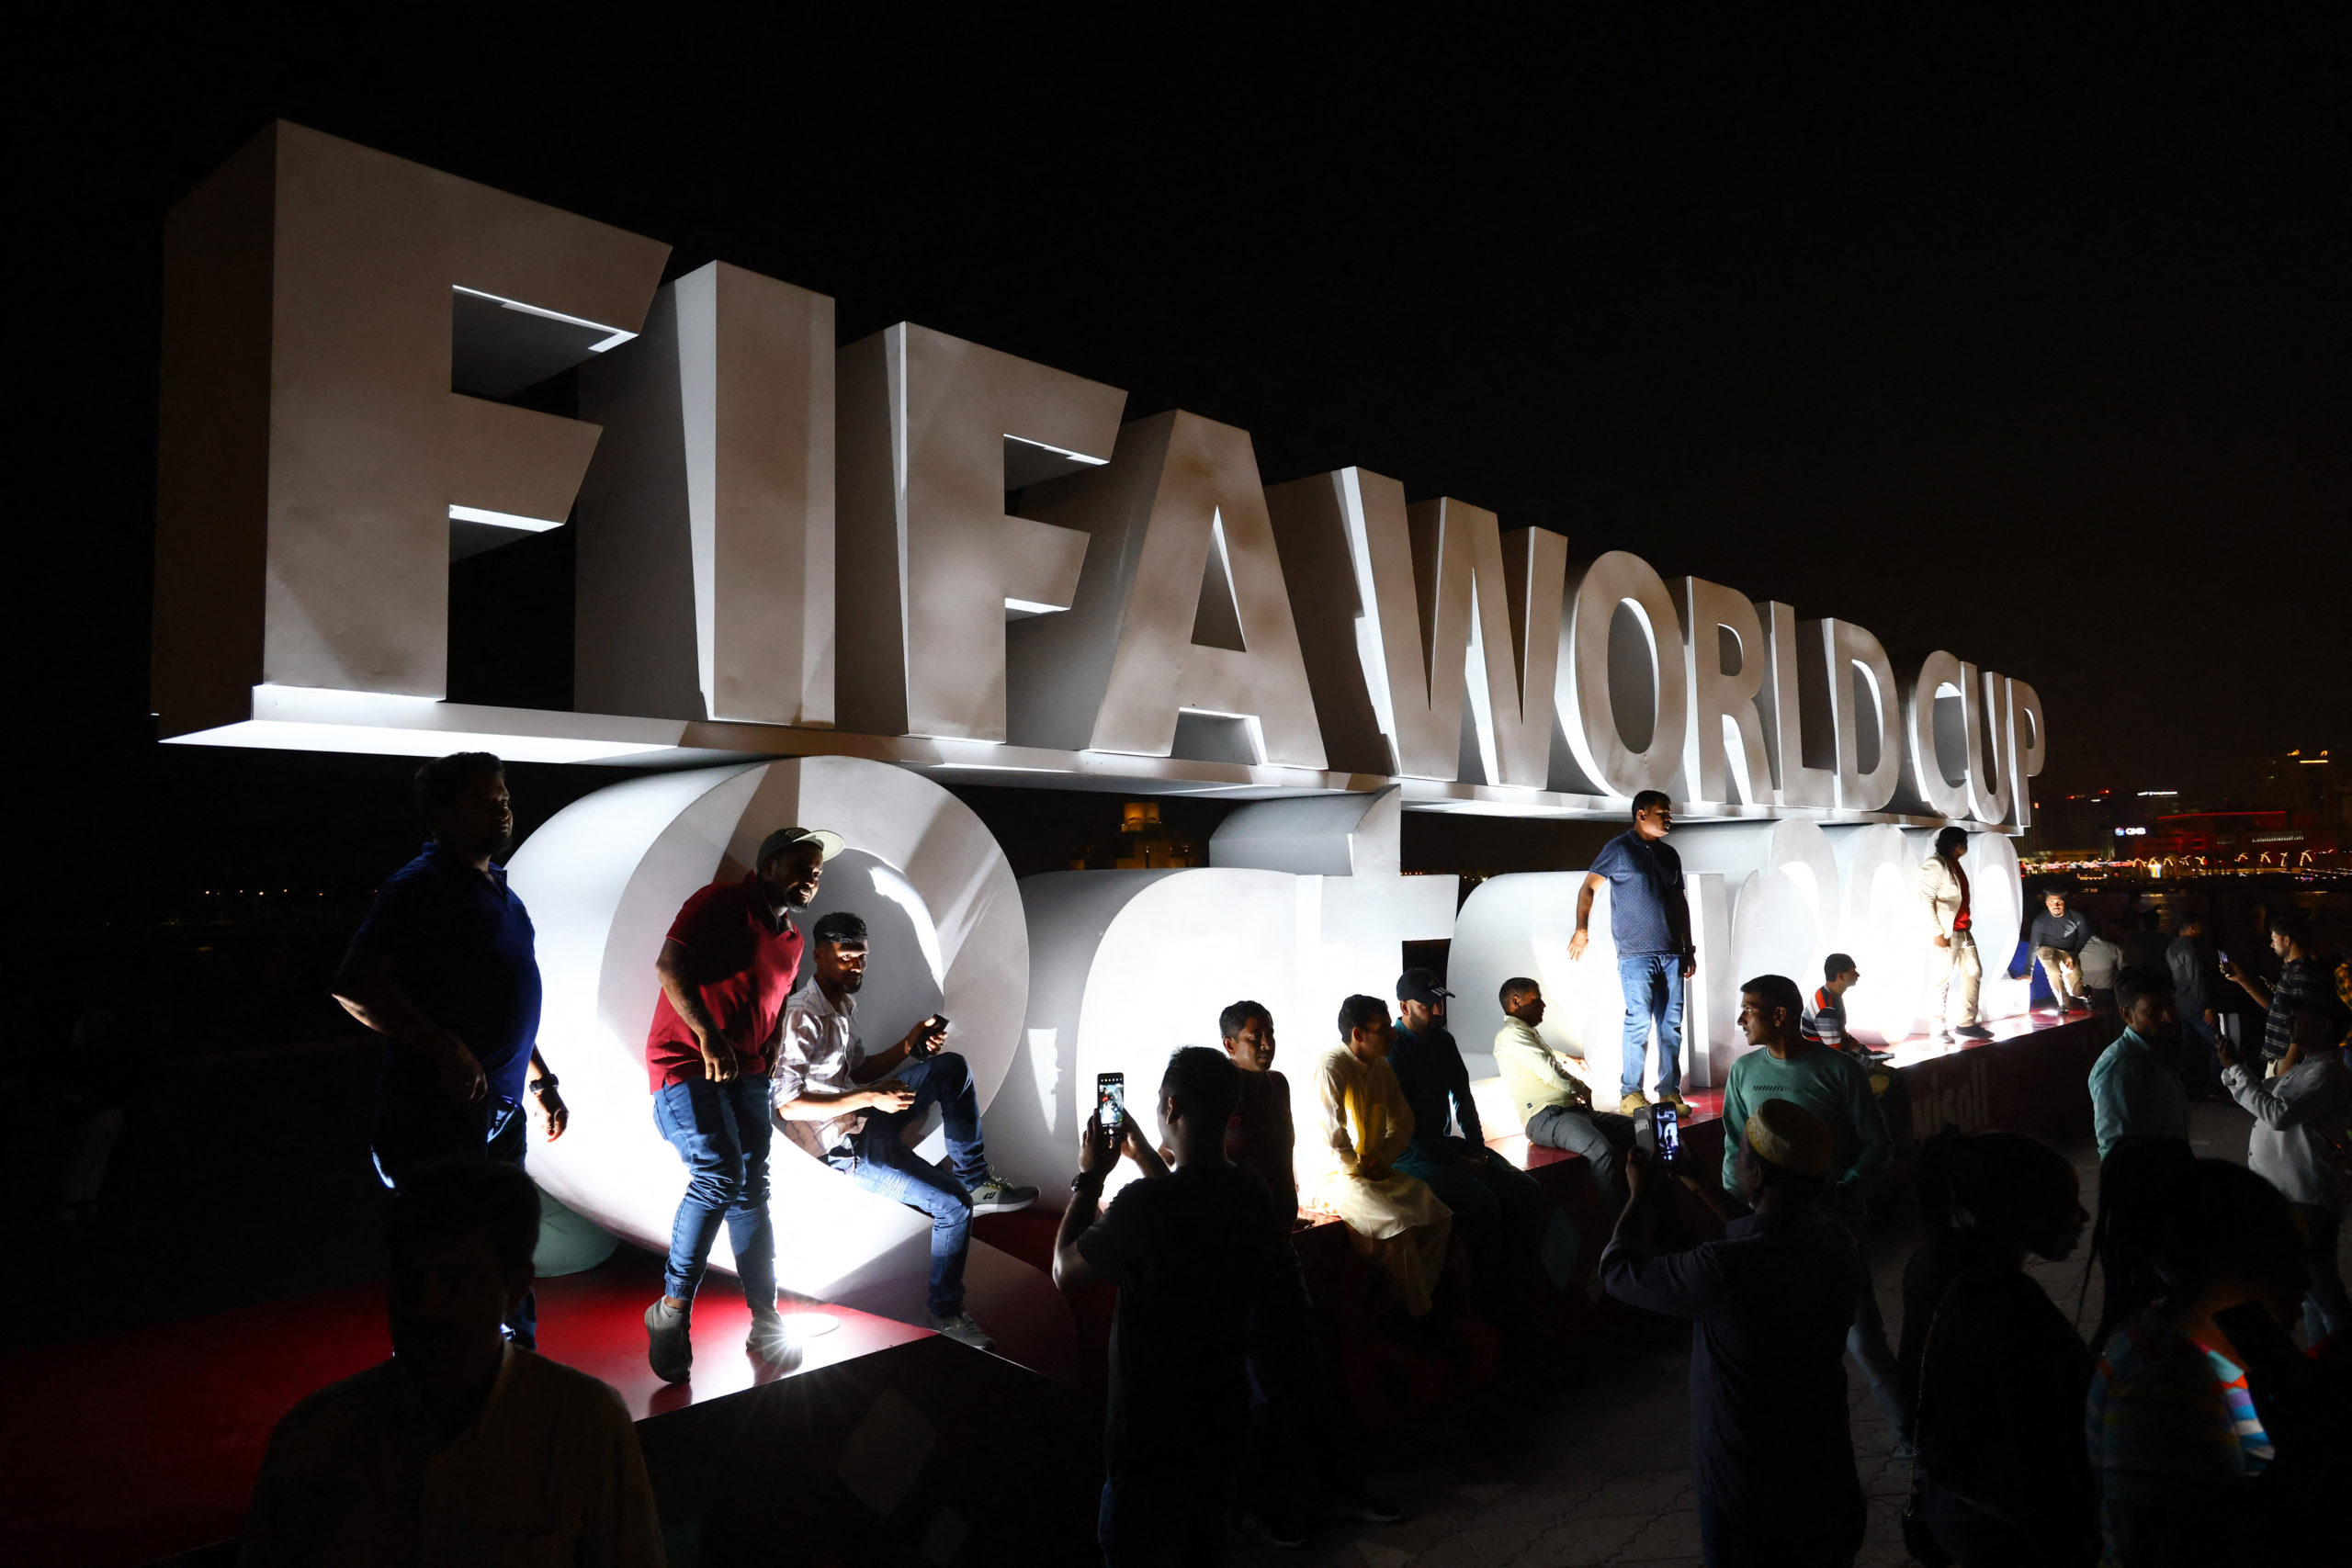 FILE PHOTO: Soccer Football - Qatar 2022 FIFA World Cup Preview, Doha, Qatar - November 18, 2022 Fans pose for pictures with the FIFA World Cup logo on the Corniche Promenade ahead of the Qatar 2022 FIFA World Cup 